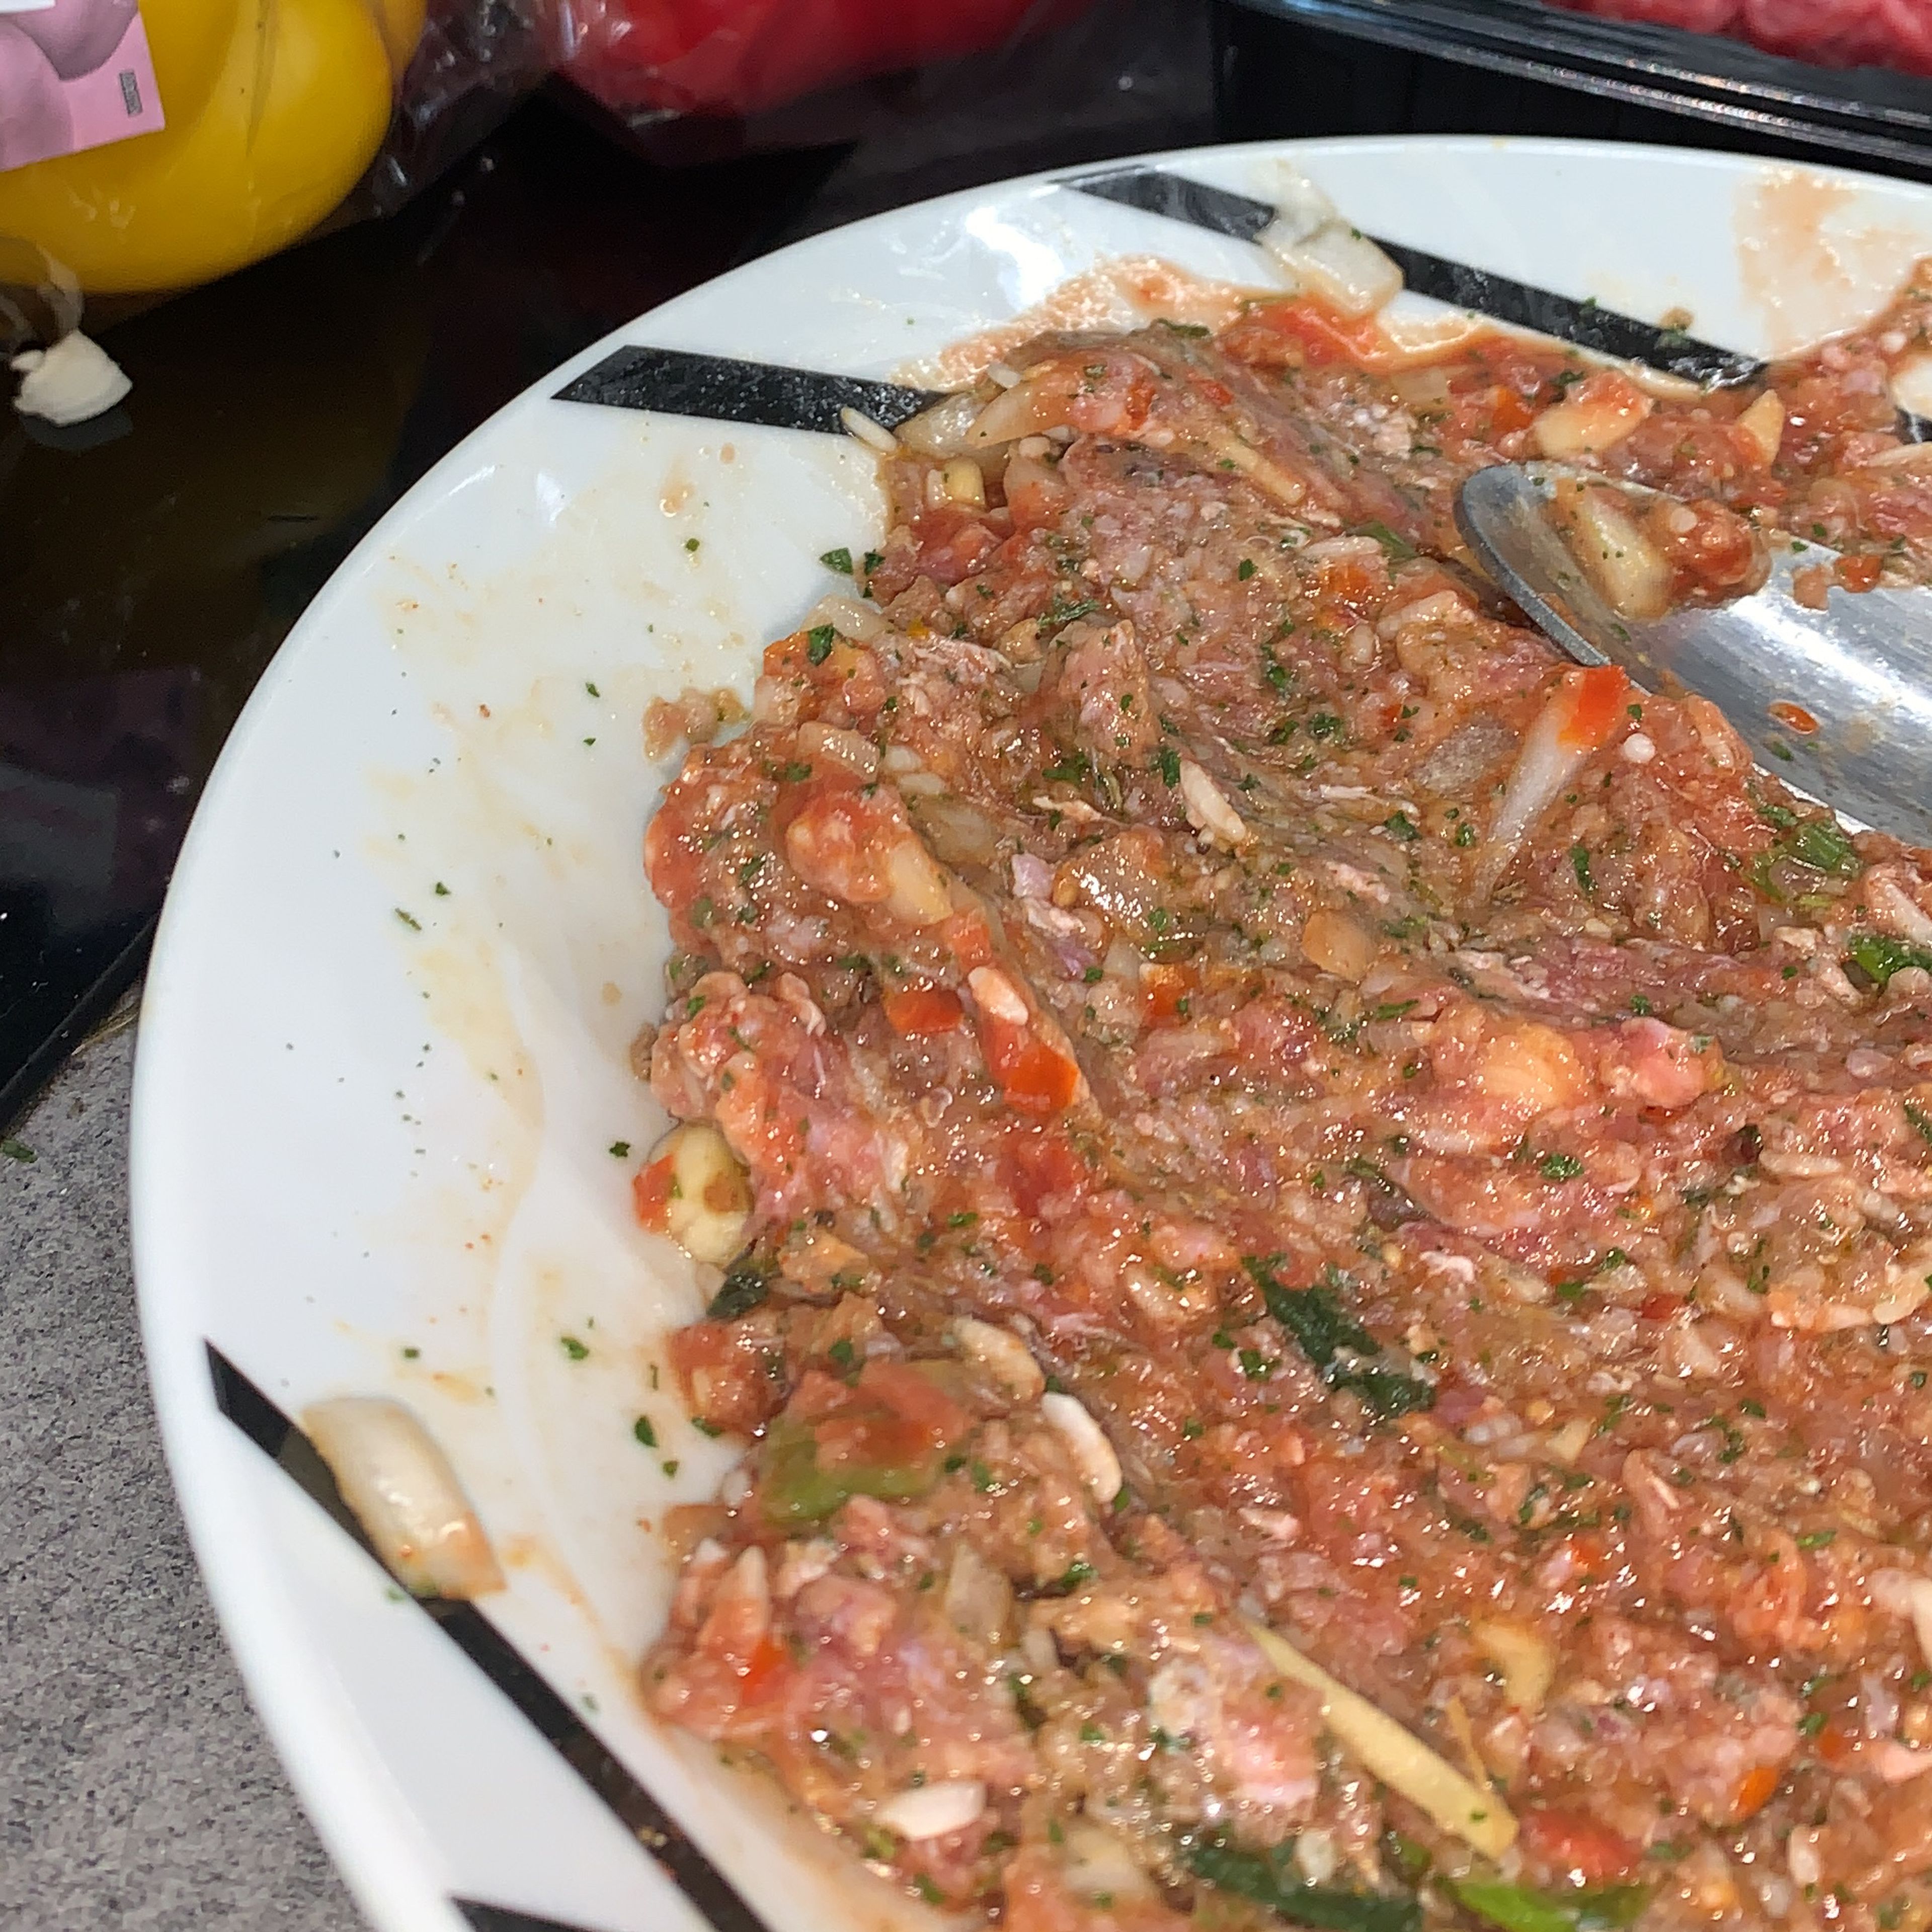 Chop your onion and garlic, wet your rice and set it aside. Blend 1 tomato , mix it with the tomato sauce and add only half of it to the minced beef. Make the rest of the filling by adding the following to the minced beef. Then mix everything until all is combined.